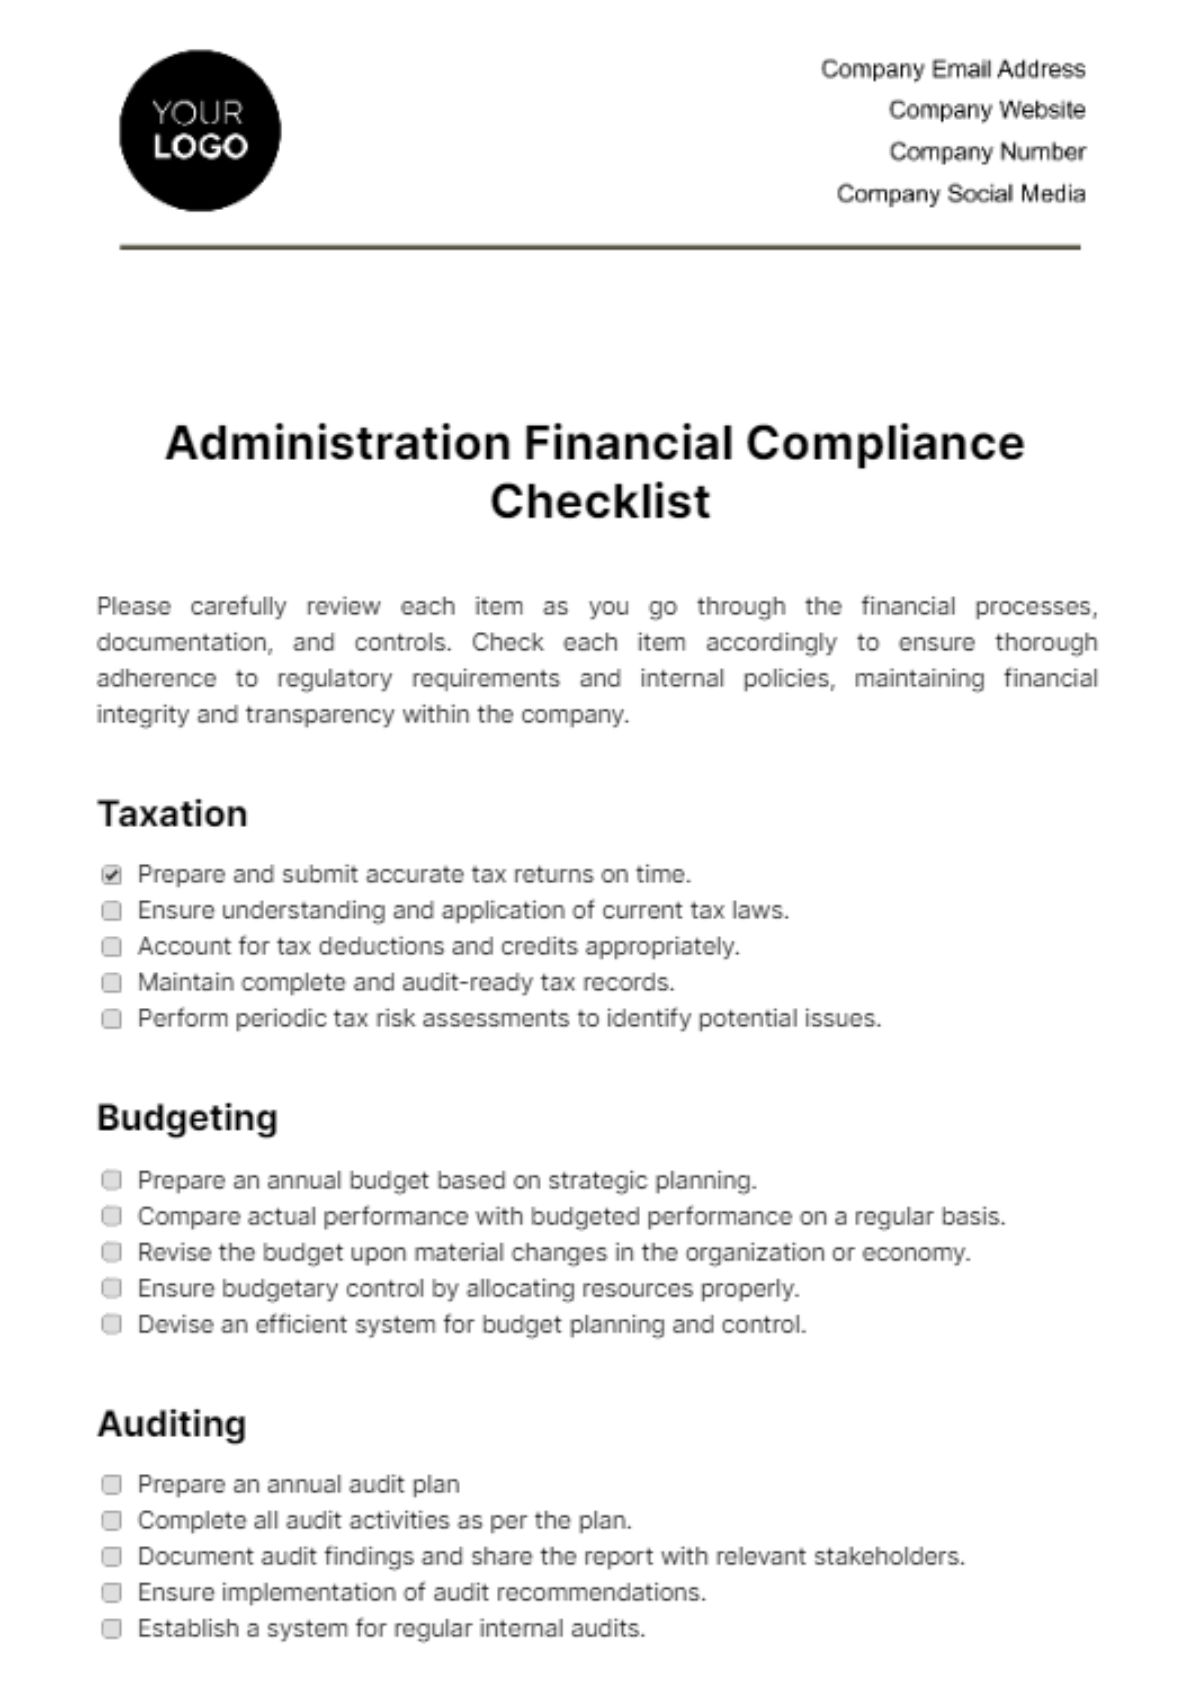 Administration Financial Compliance Checklist Template